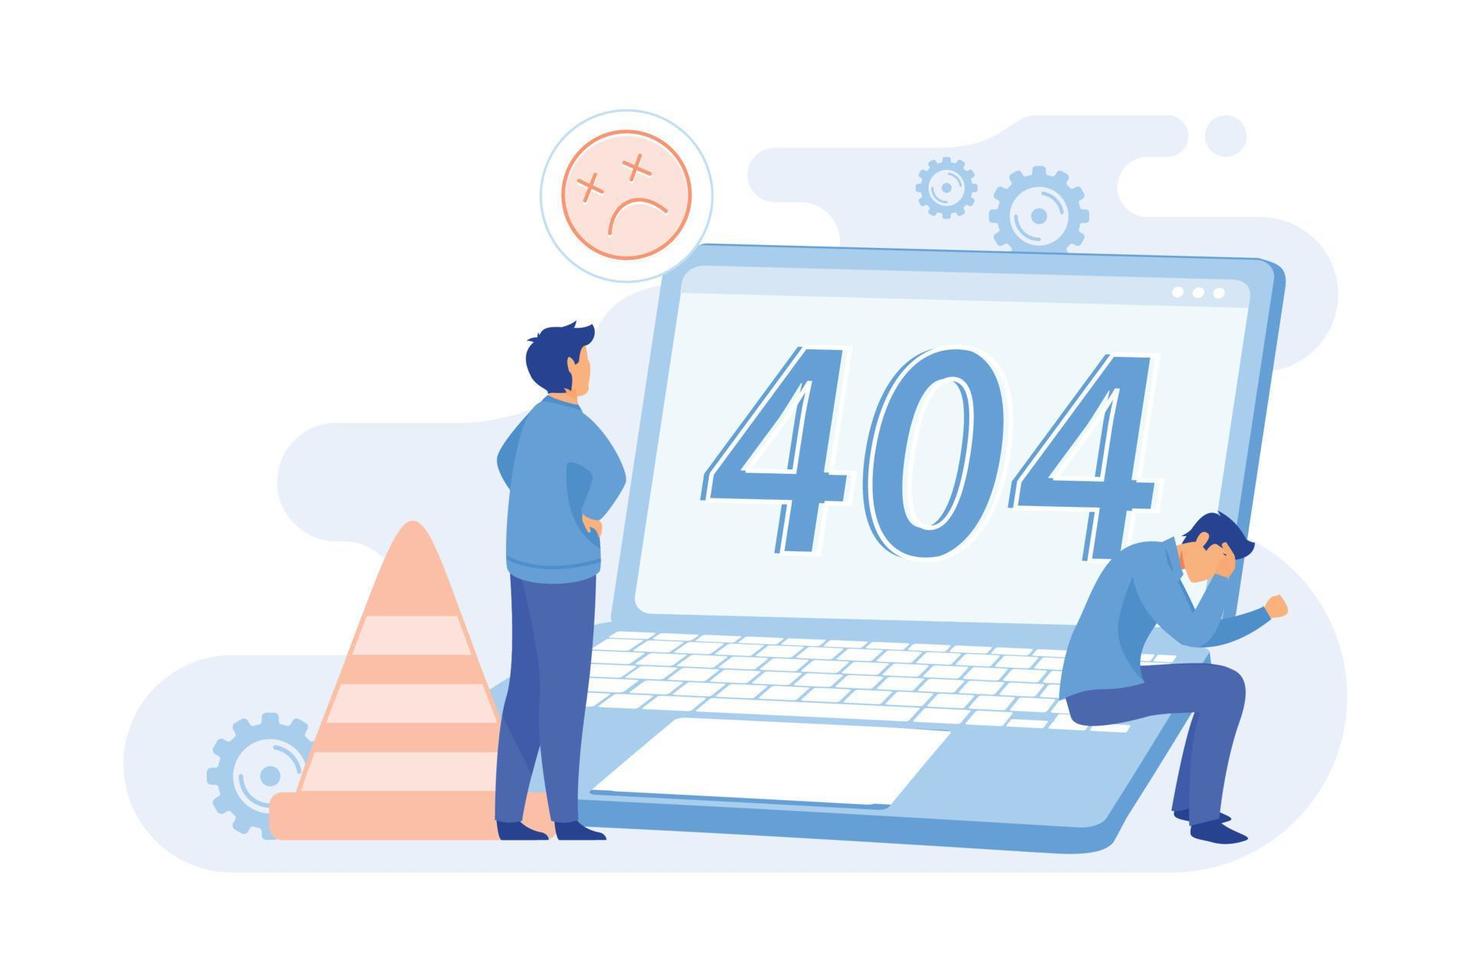 404 error abstract concept 404 template, browser download failure, page not found, server request, unavailable, website communication problem flat design modern illustration vector